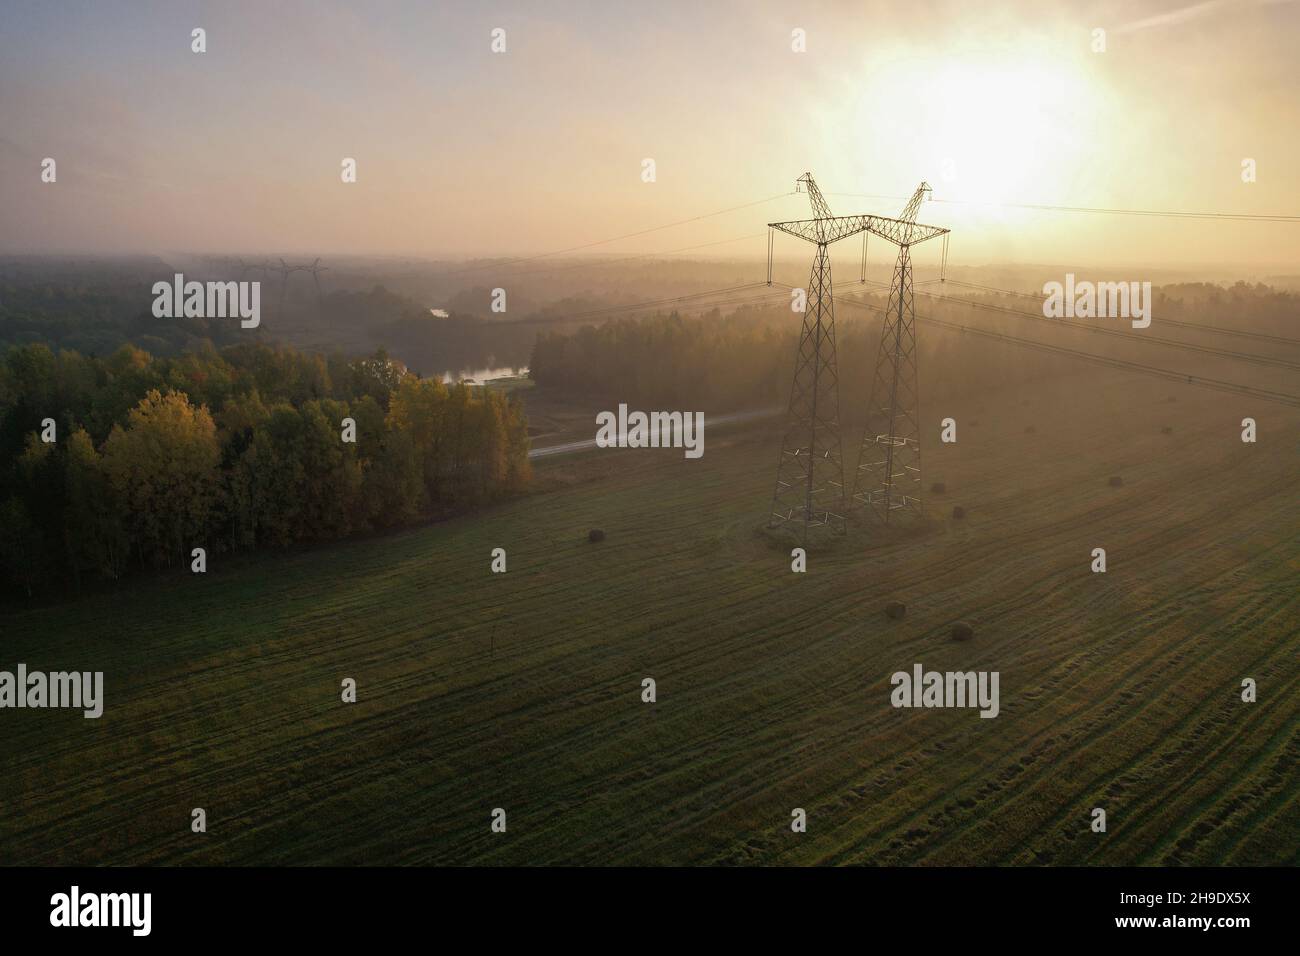 Power line in the countryside at dawn. Stock Photo